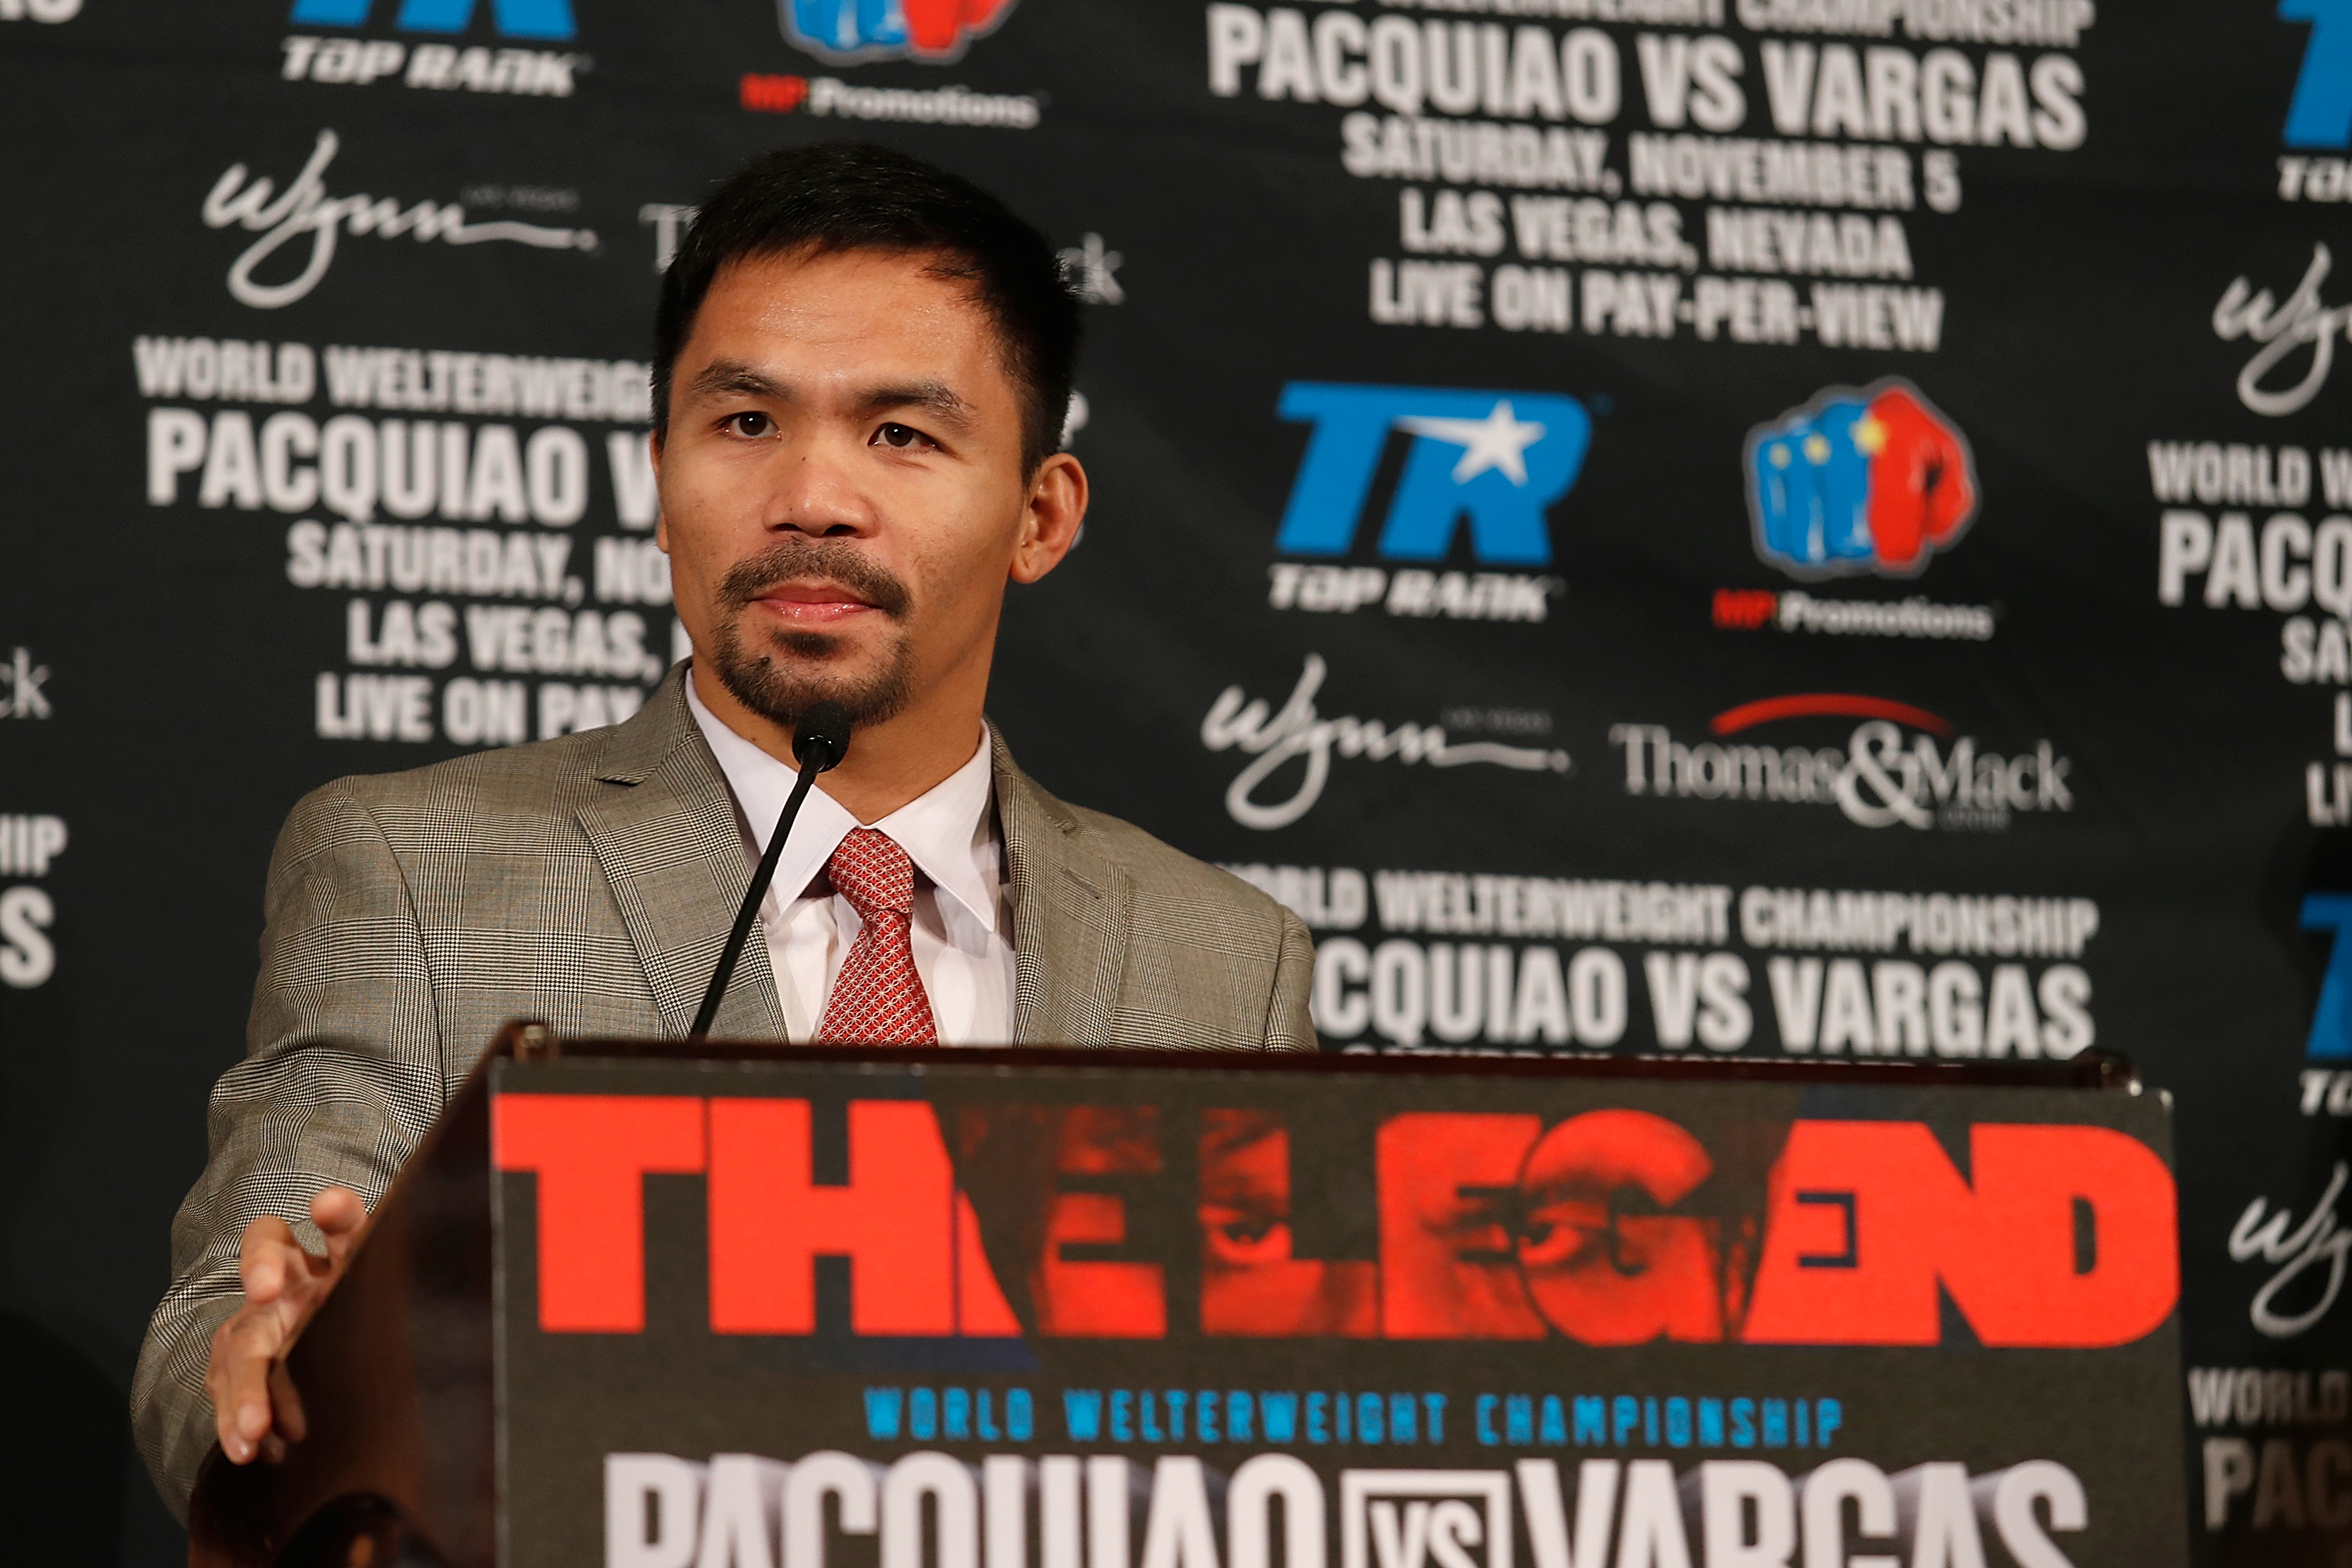 BEVERLY HILLS, CA - SEPTEMBER 08: Manny Pacquiao speaks during a press conference at the Beverly Hills Hotel on September 8, 2016 in Beverly Hills, California.   Josh Lefkowitz/Getty Images/AFP